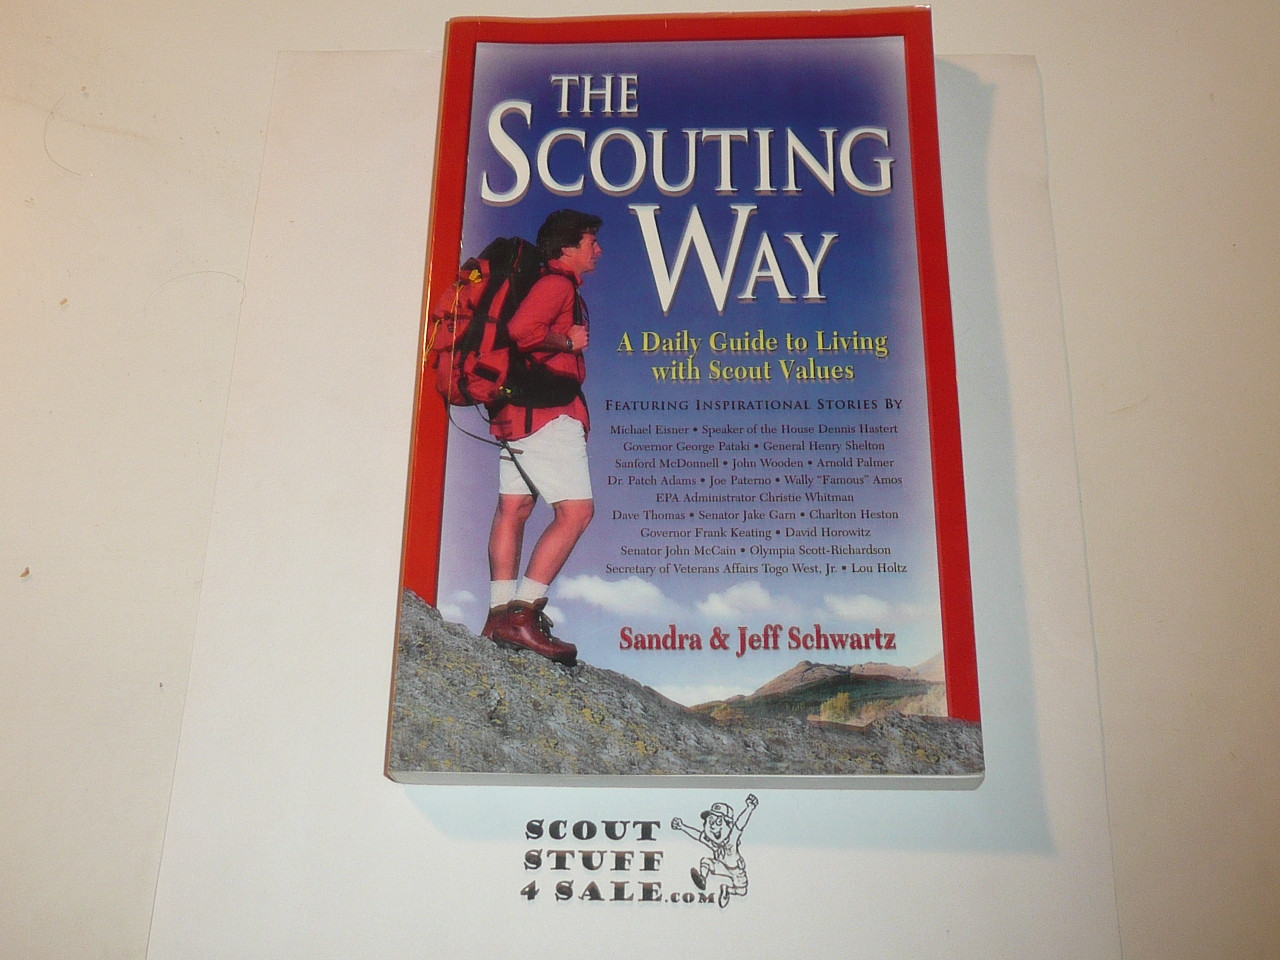 The Scouting Way, A Daily Guide to Living with Scout Values, by Sandra and Jeff Schwartz, 2001 printing